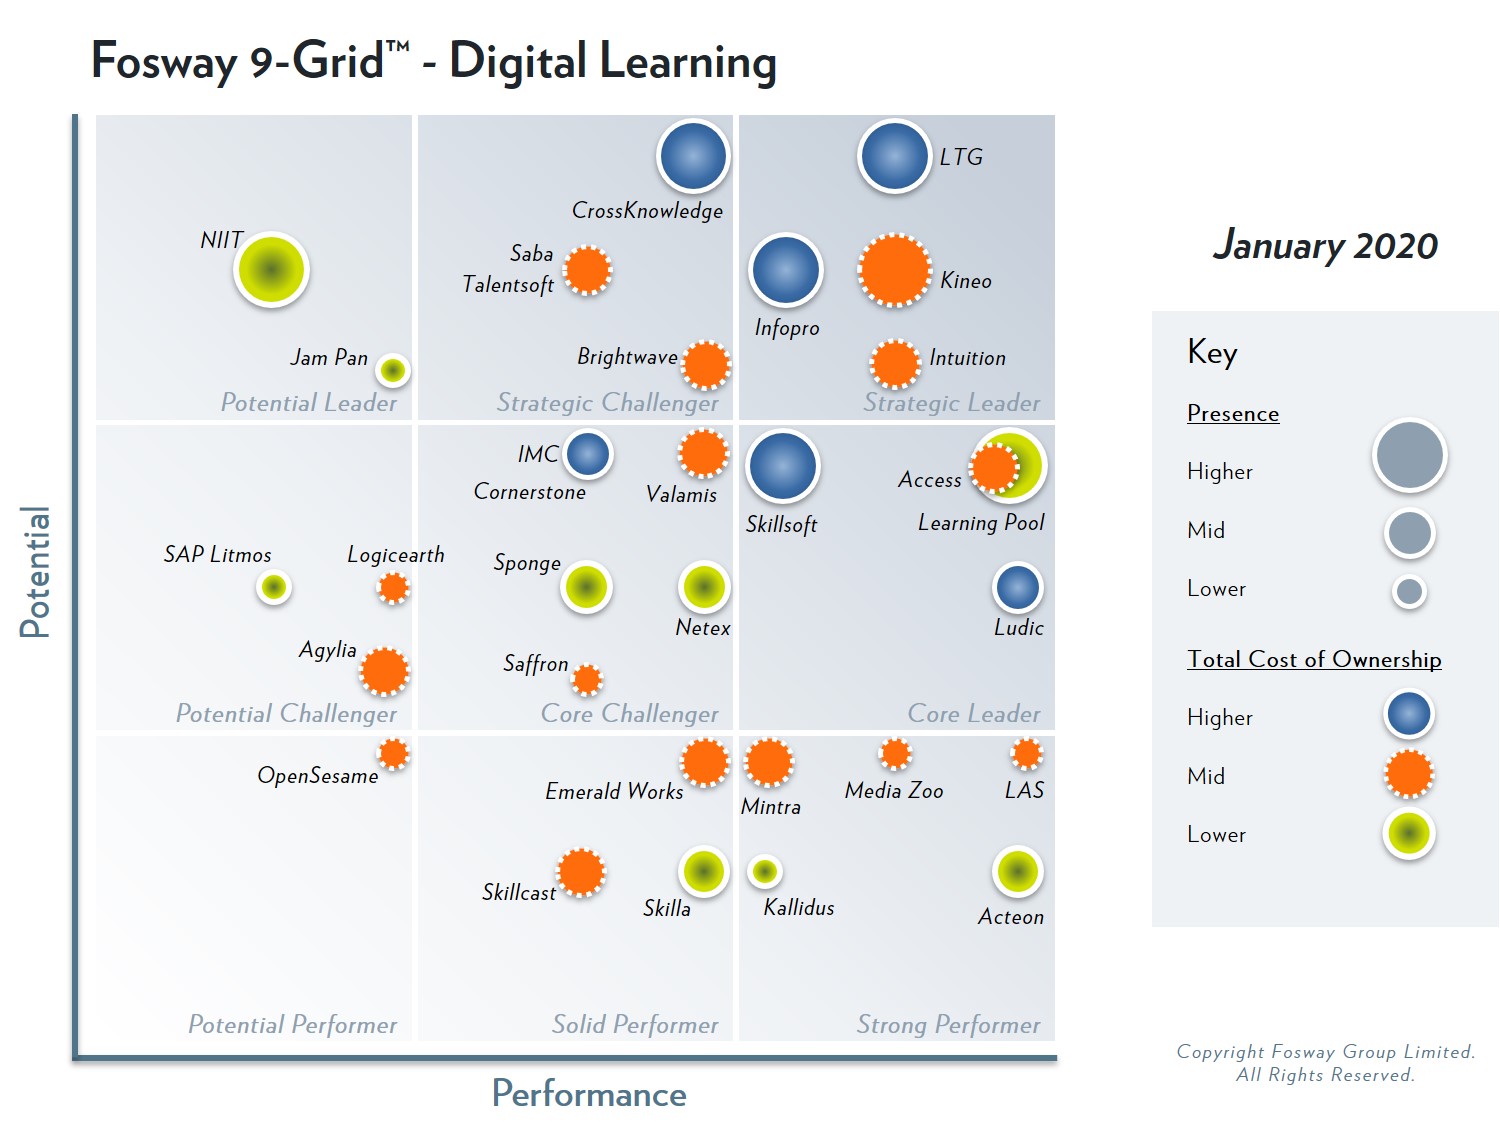 VectorVMS' parent company, Learning Technologies Group, has been identified as Strategic Leader in the 2020 Fosway 9-Grid™ for Digital Learning for the fourth year running